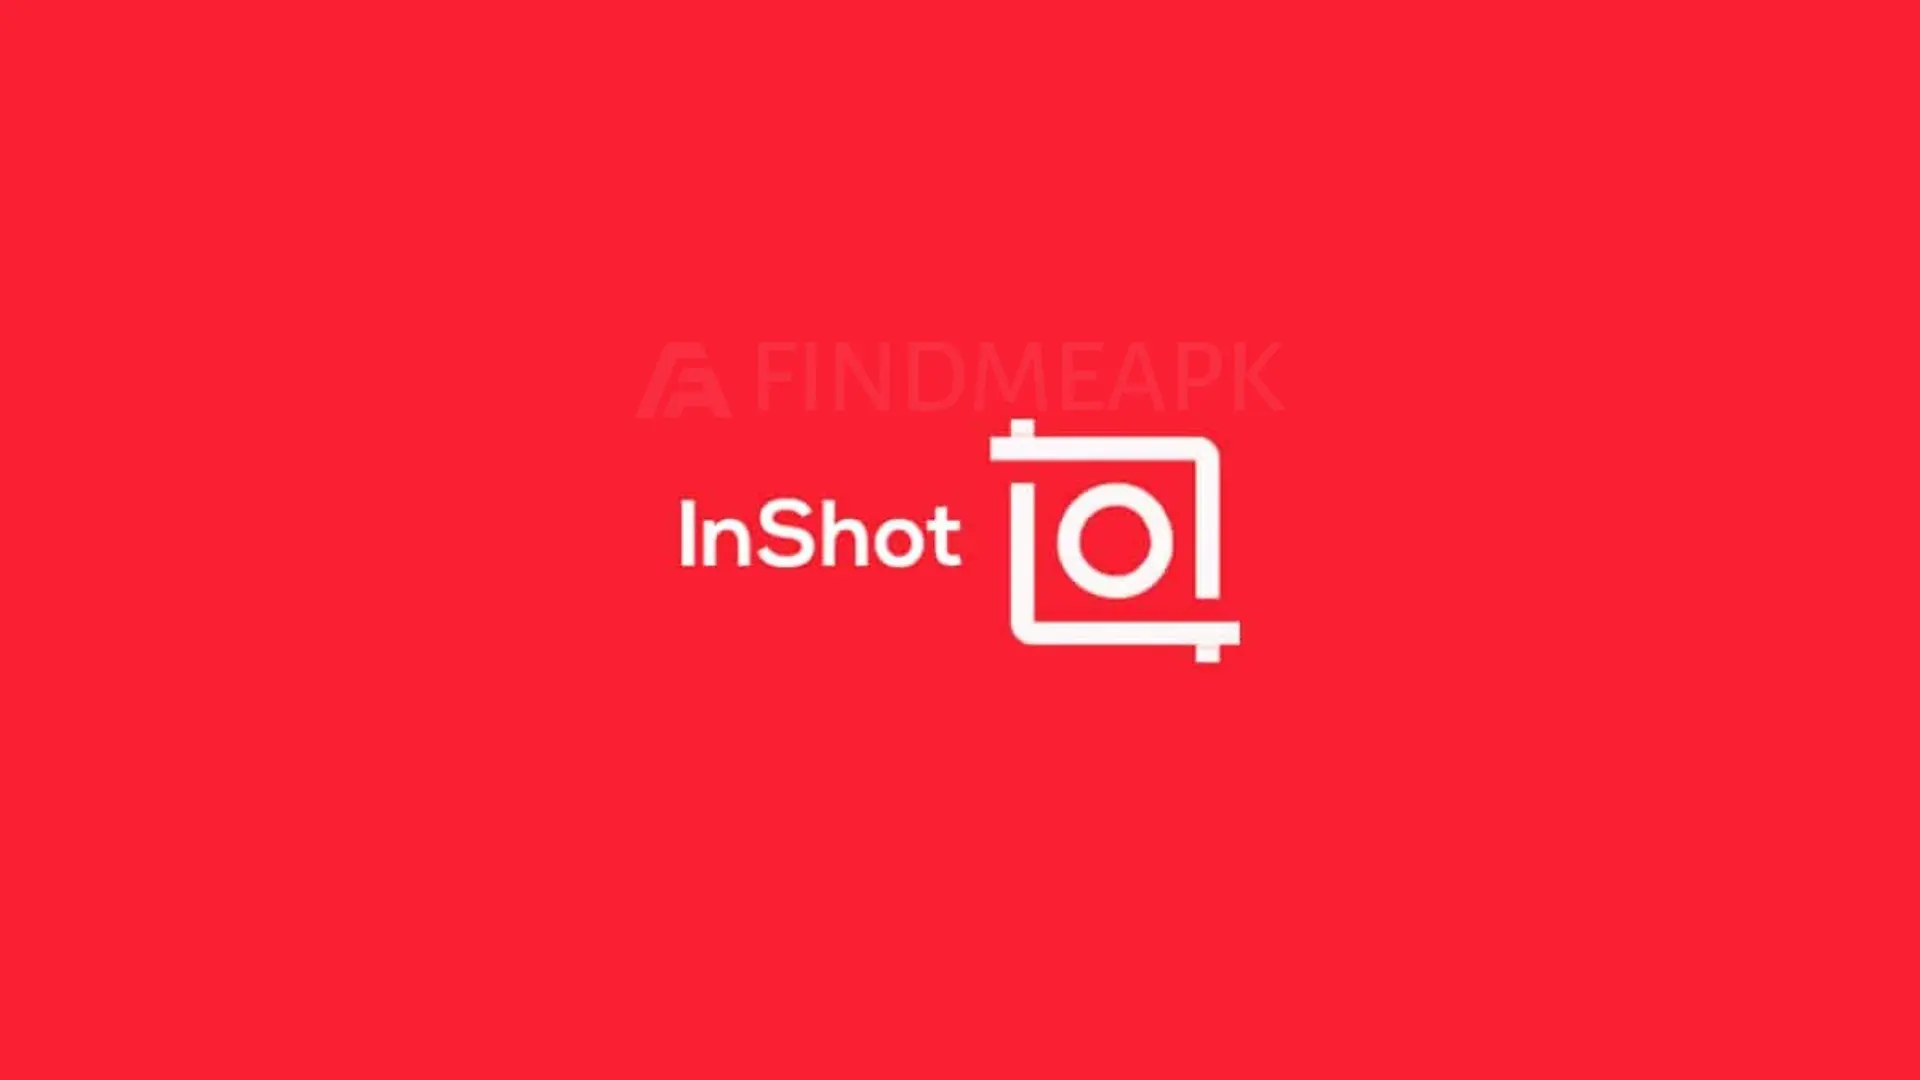 Inshot feature image